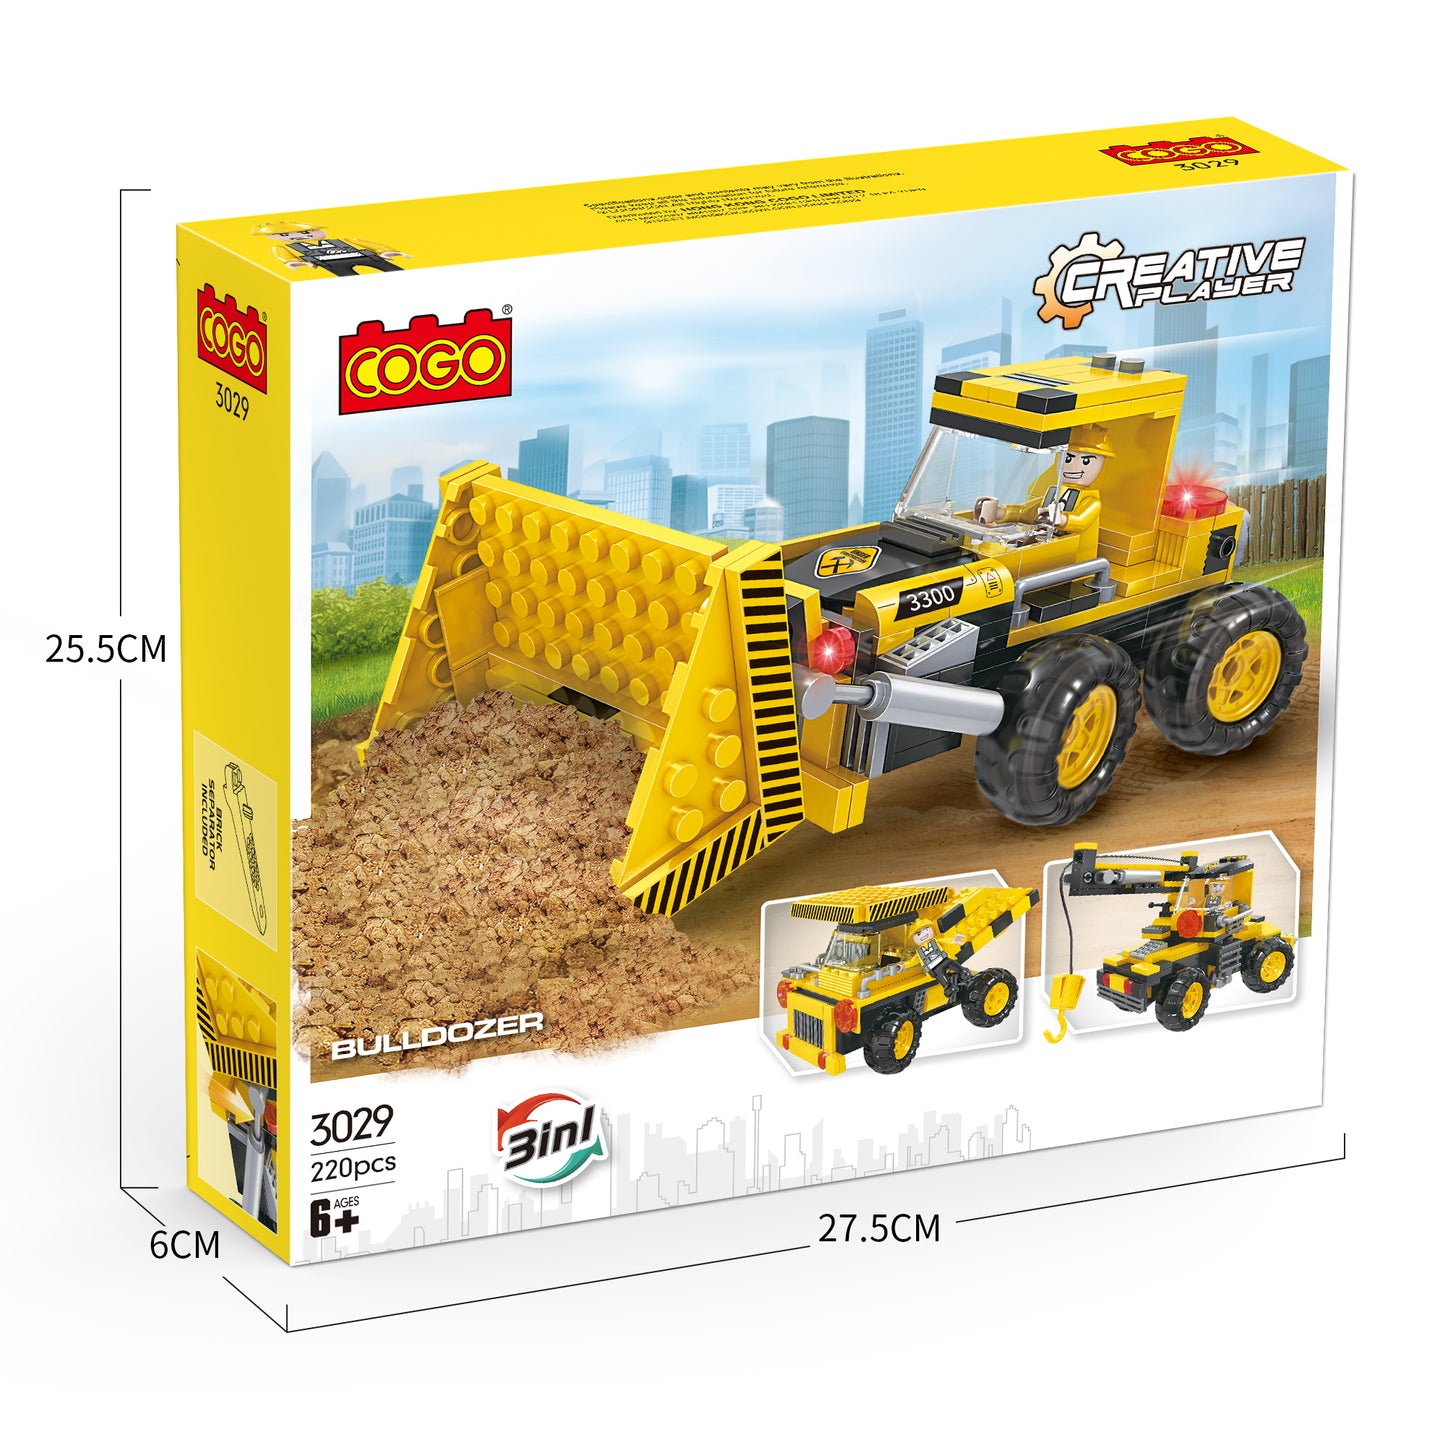 3-in-1 Creative Player Construction Truck